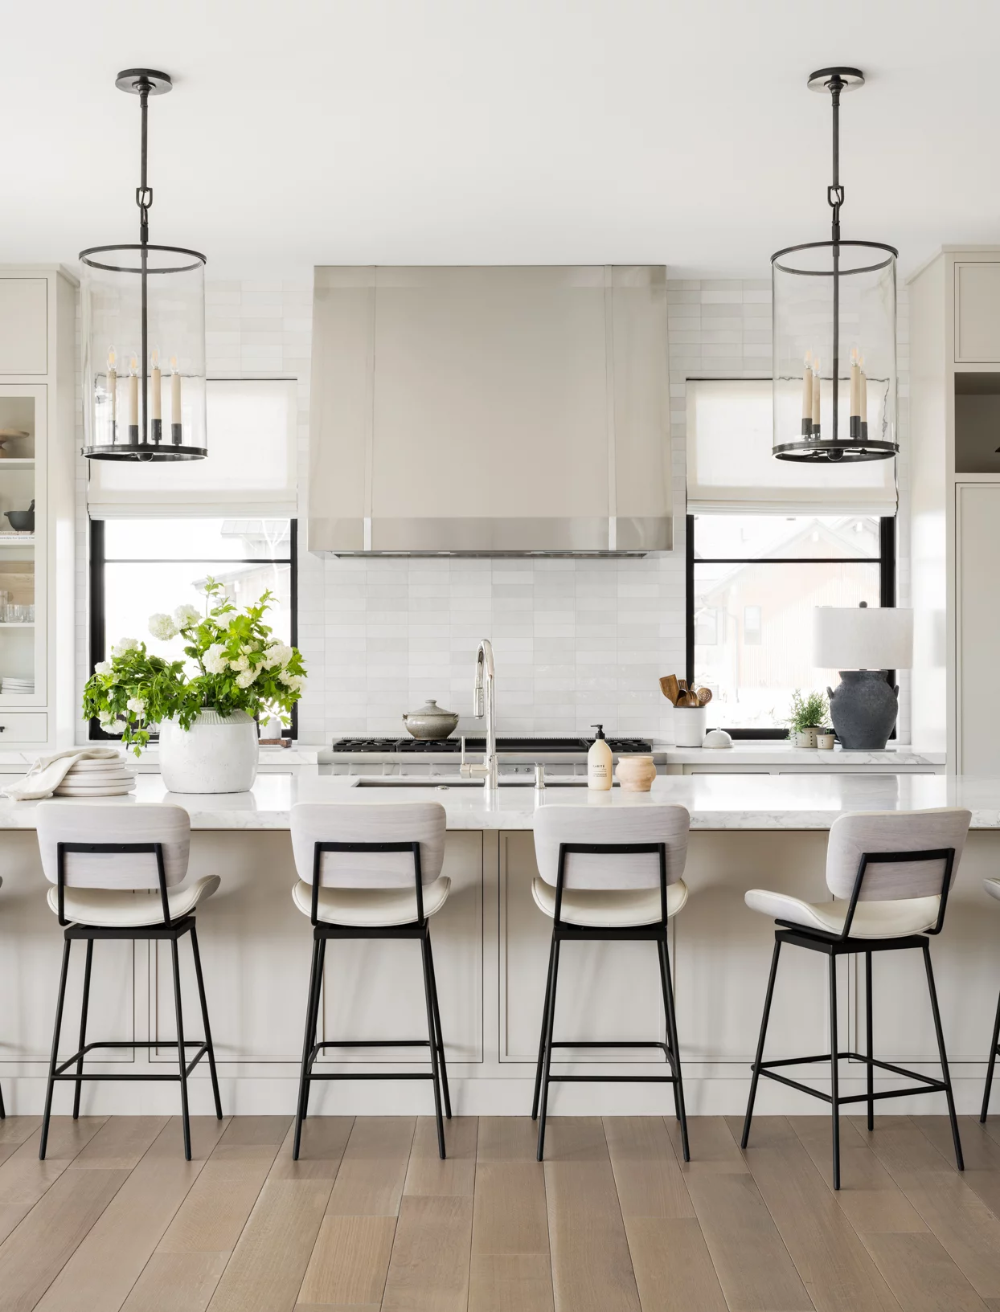 Dining in Style: Exploring the Charm of Kitchen Chairs